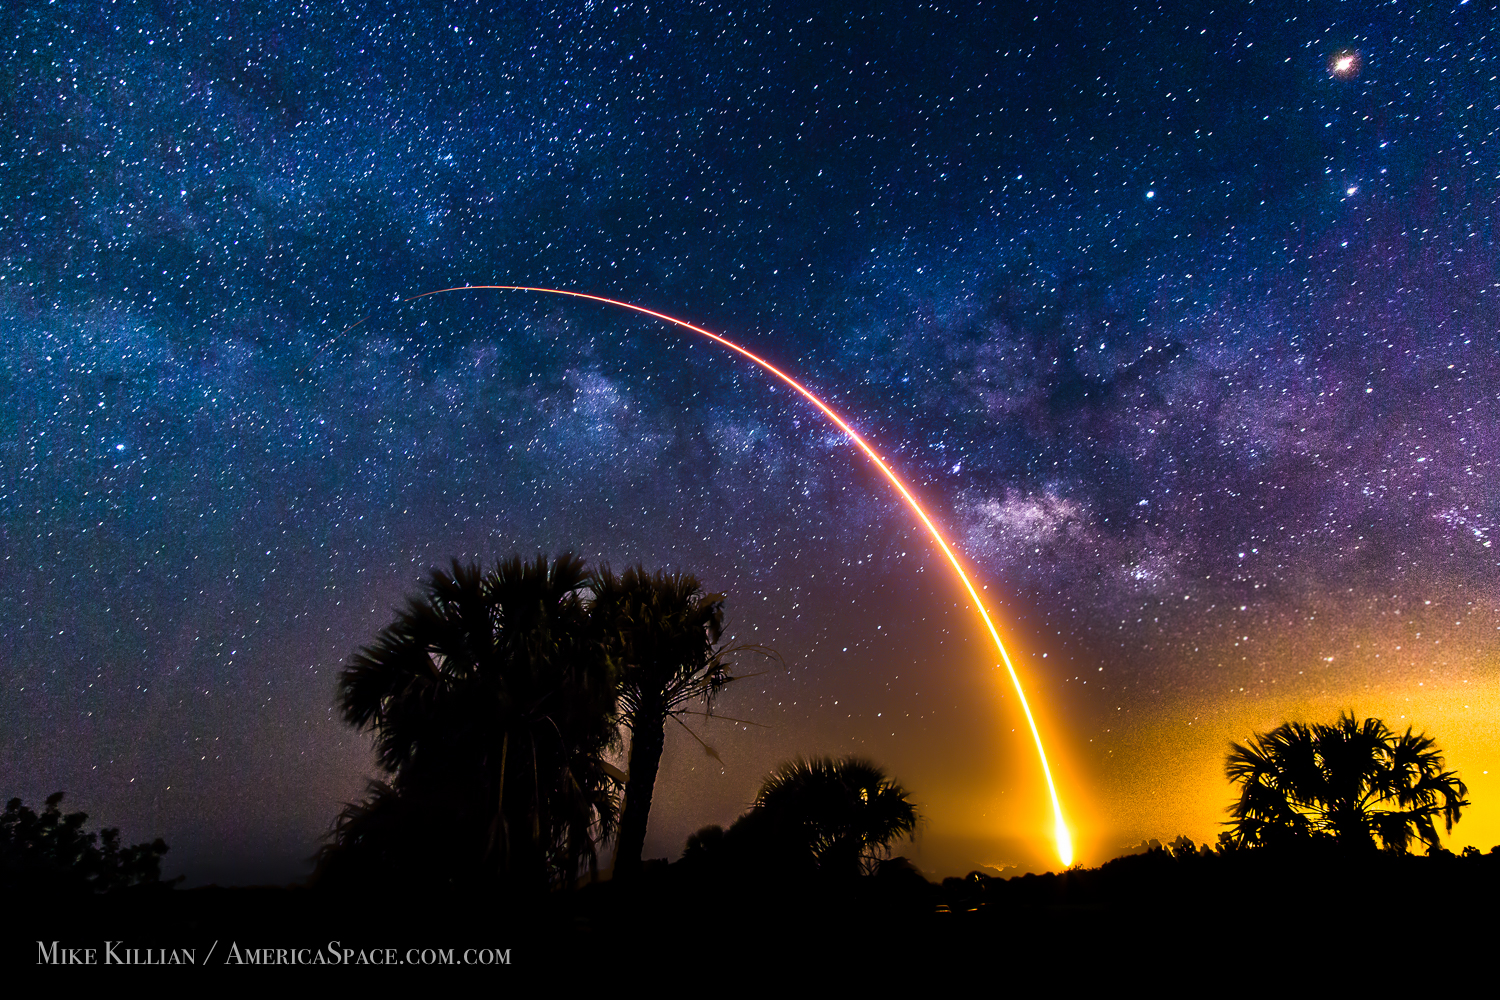 SpaceX's Falcon 9 Rocket Heads for the Stars in Stunning Photo 